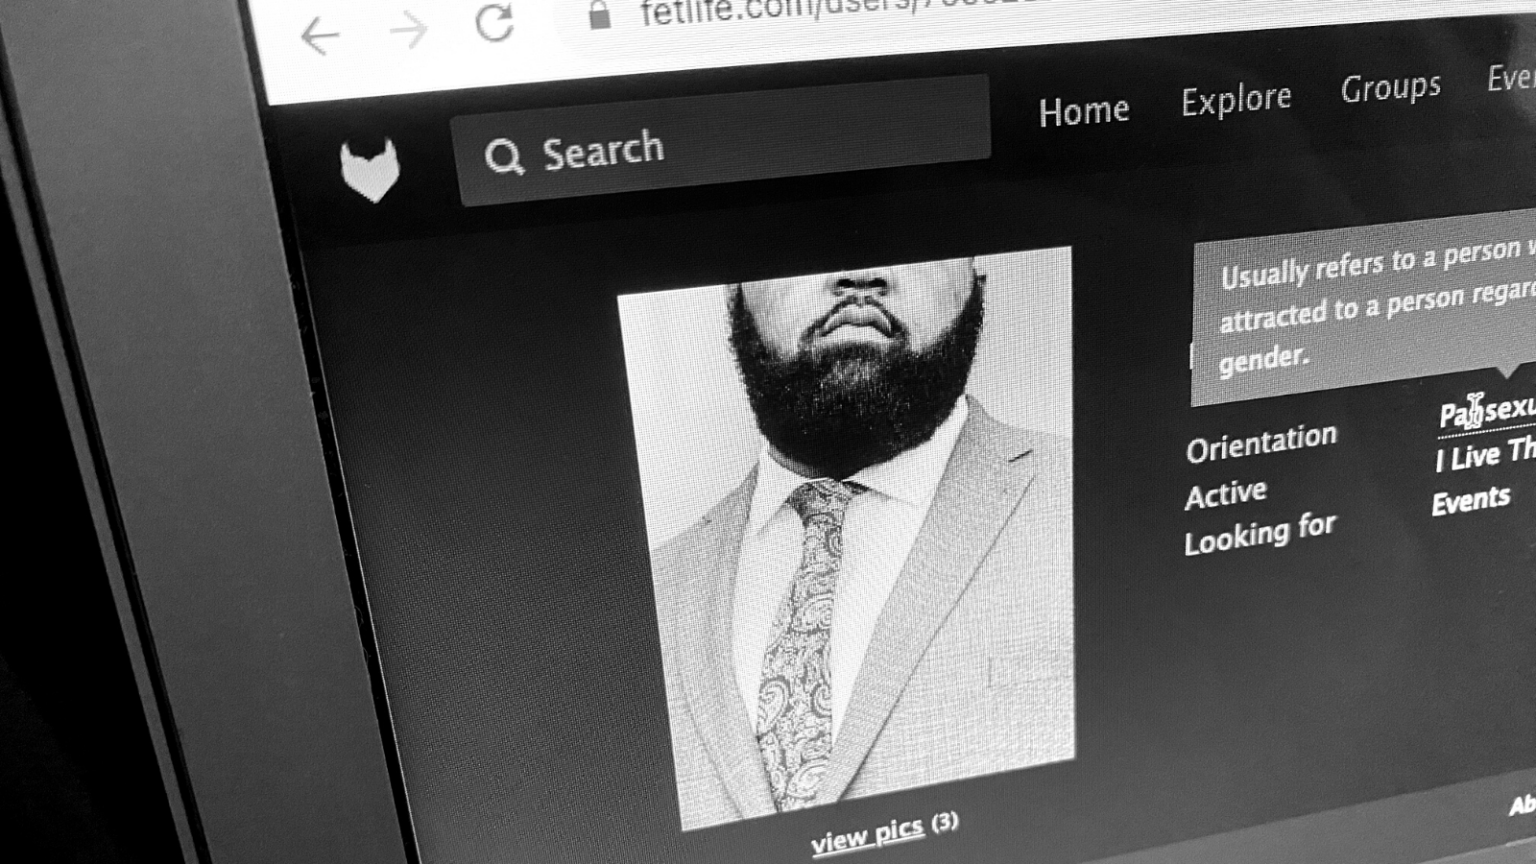 Photo of a computer screen showing the FetLife profile of a Black man with a bear wearing a suit, with his face partly cropped out